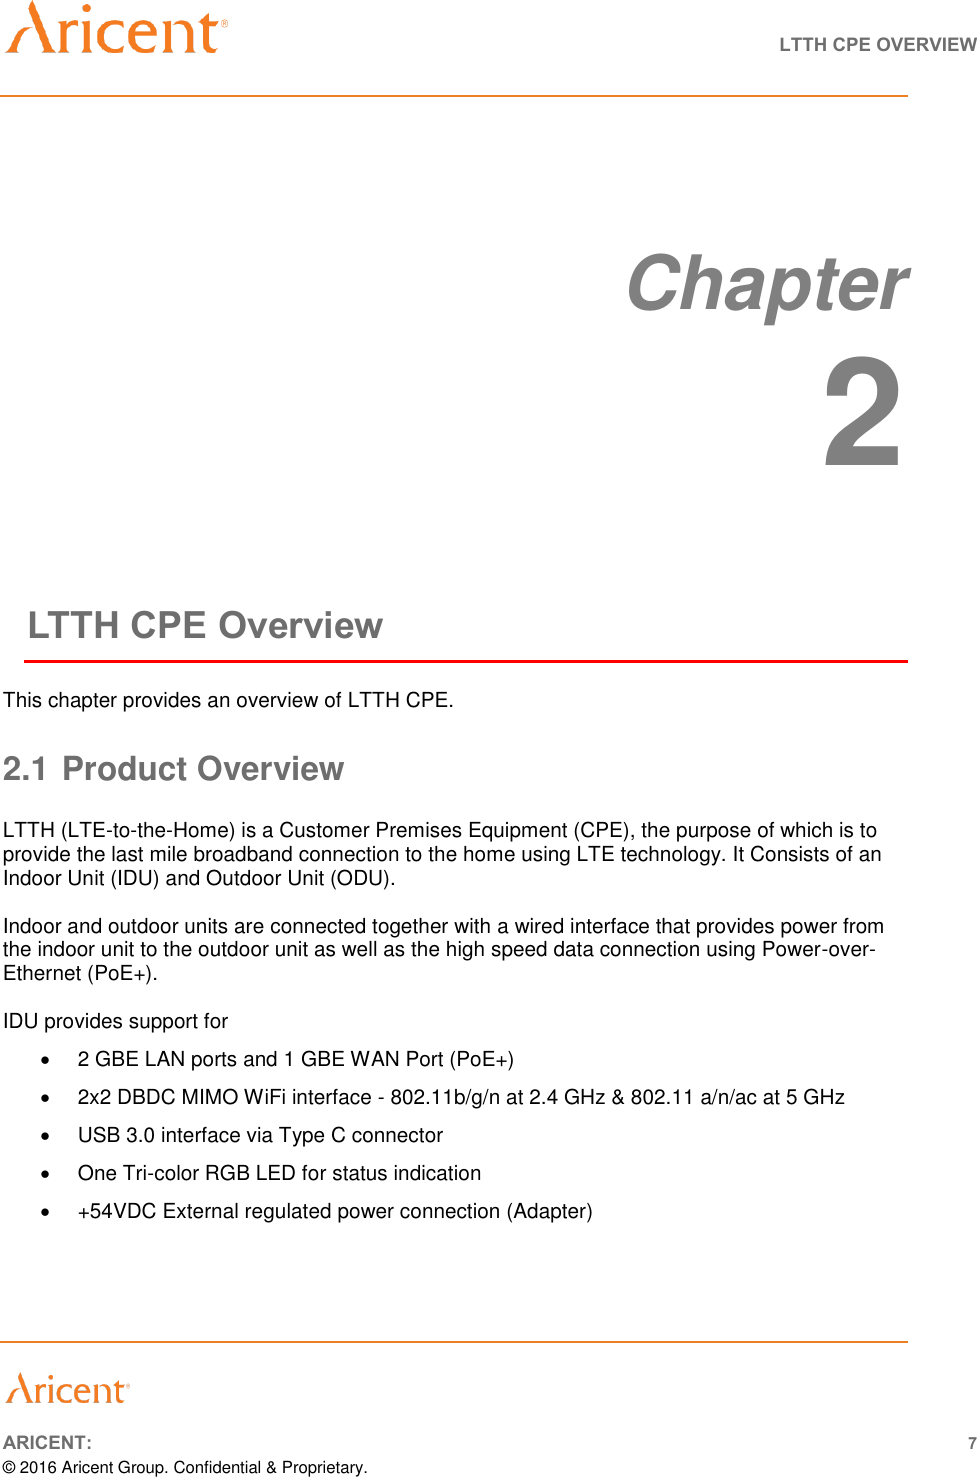   LTTH CPE OVERVIEW       ARICENT: 7 © 2016 Aricent Group. Confidential &amp; Proprietary.     Chapter 2 LTTH CPE Overview This chapter provides an overview of LTTH CPE. 2.1 Product Overview  LTTH (LTE-to-the-Home) is a Customer Premises Equipment (CPE), the purpose of which is to provide the last mile broadband connection to the home using LTE technology. It Consists of an Indoor Unit (IDU) and Outdoor Unit (ODU).  Indoor and outdoor units are connected together with a wired interface that provides power from the indoor unit to the outdoor unit as well as the high speed data connection using Power-over-Ethernet (PoE+).  IDU provides support for  2 GBE LAN ports and 1 GBE WAN Port (PoE+)   2x2 DBDC MIMO WiFi interface - 802.11b/g/n at 2.4 GHz &amp; 802.11 a/n/ac at 5 GHz   USB 3.0 interface via Type C connector   One Tri-color RGB LED for status indication   +54VDC External regulated power connection (Adapter)    